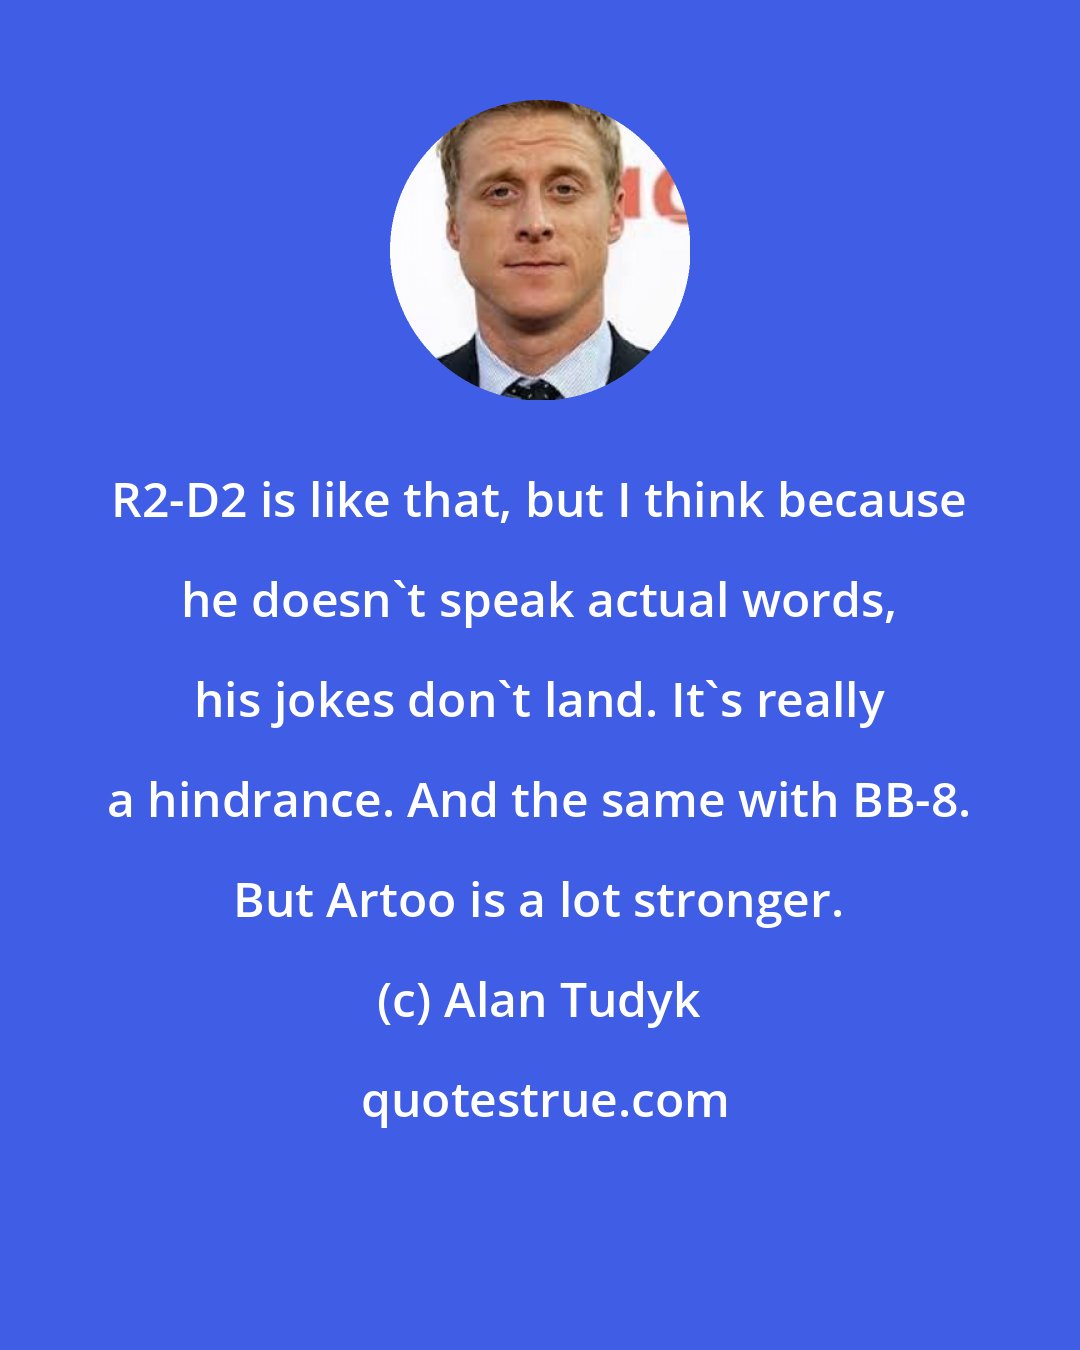 Alan Tudyk: R2-D2 is like that, but I think because he doesn't speak actual words, his jokes don't land. It's really a hindrance. And the same with BB-8. But Artoo is a lot stronger.